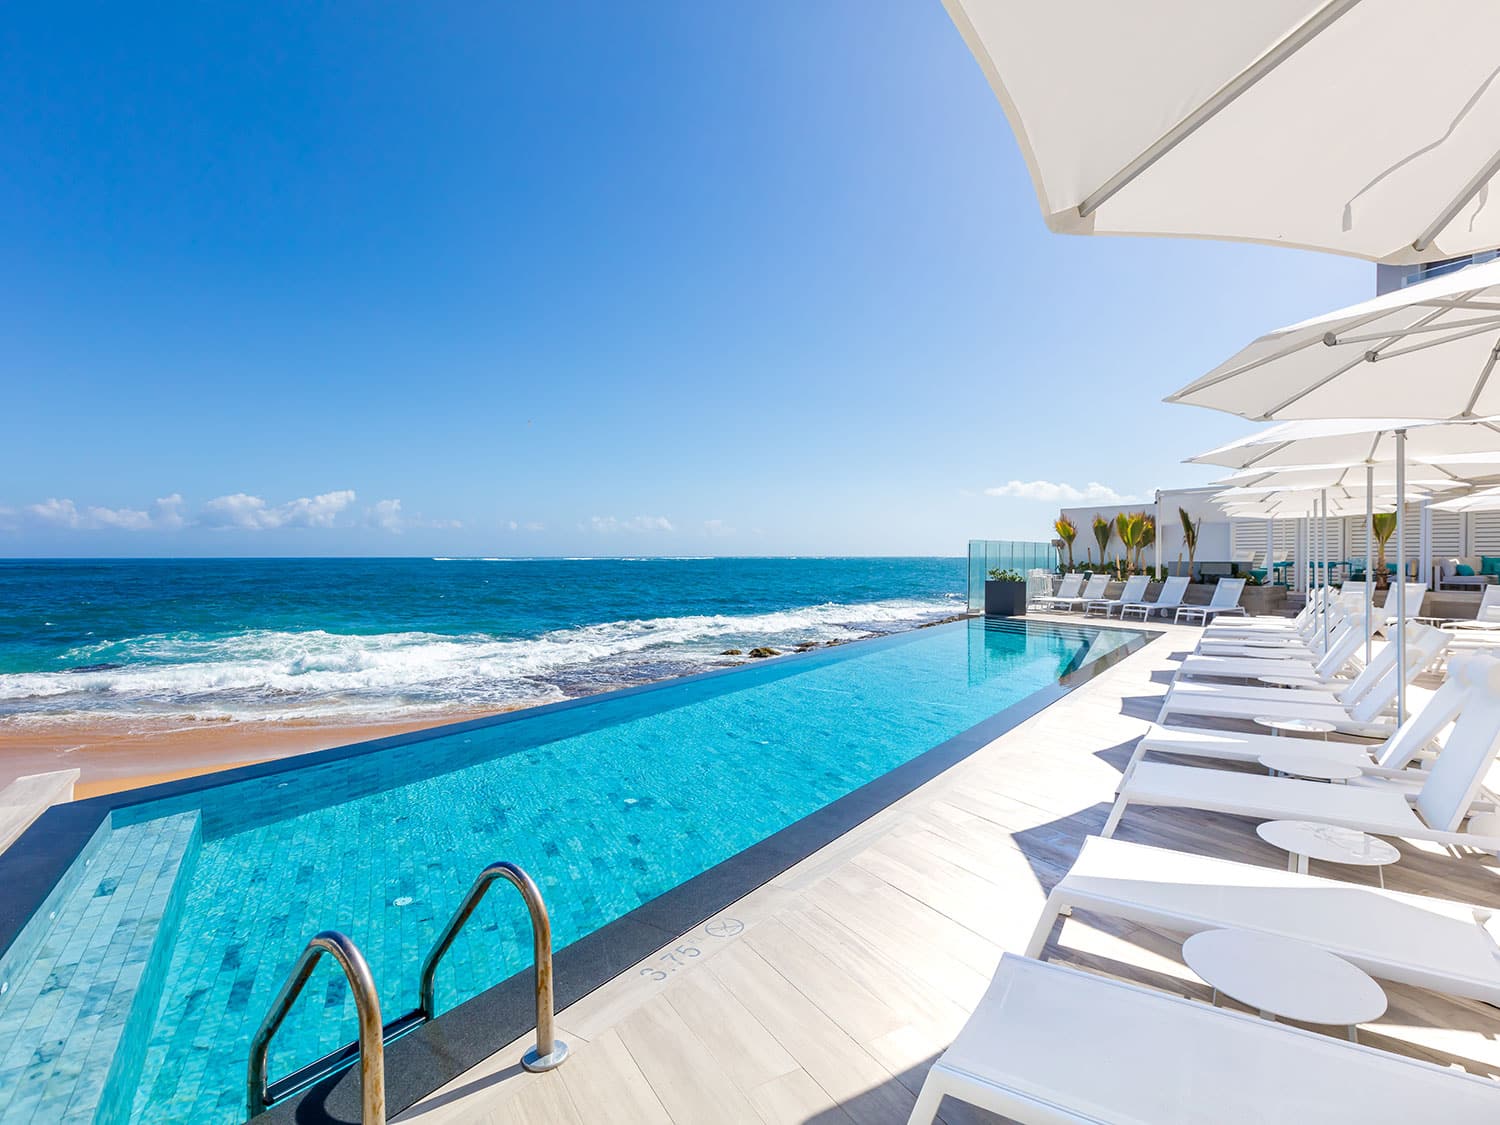 The pool and loungers at the Condado Ocean Club resort in Puerto Rico.